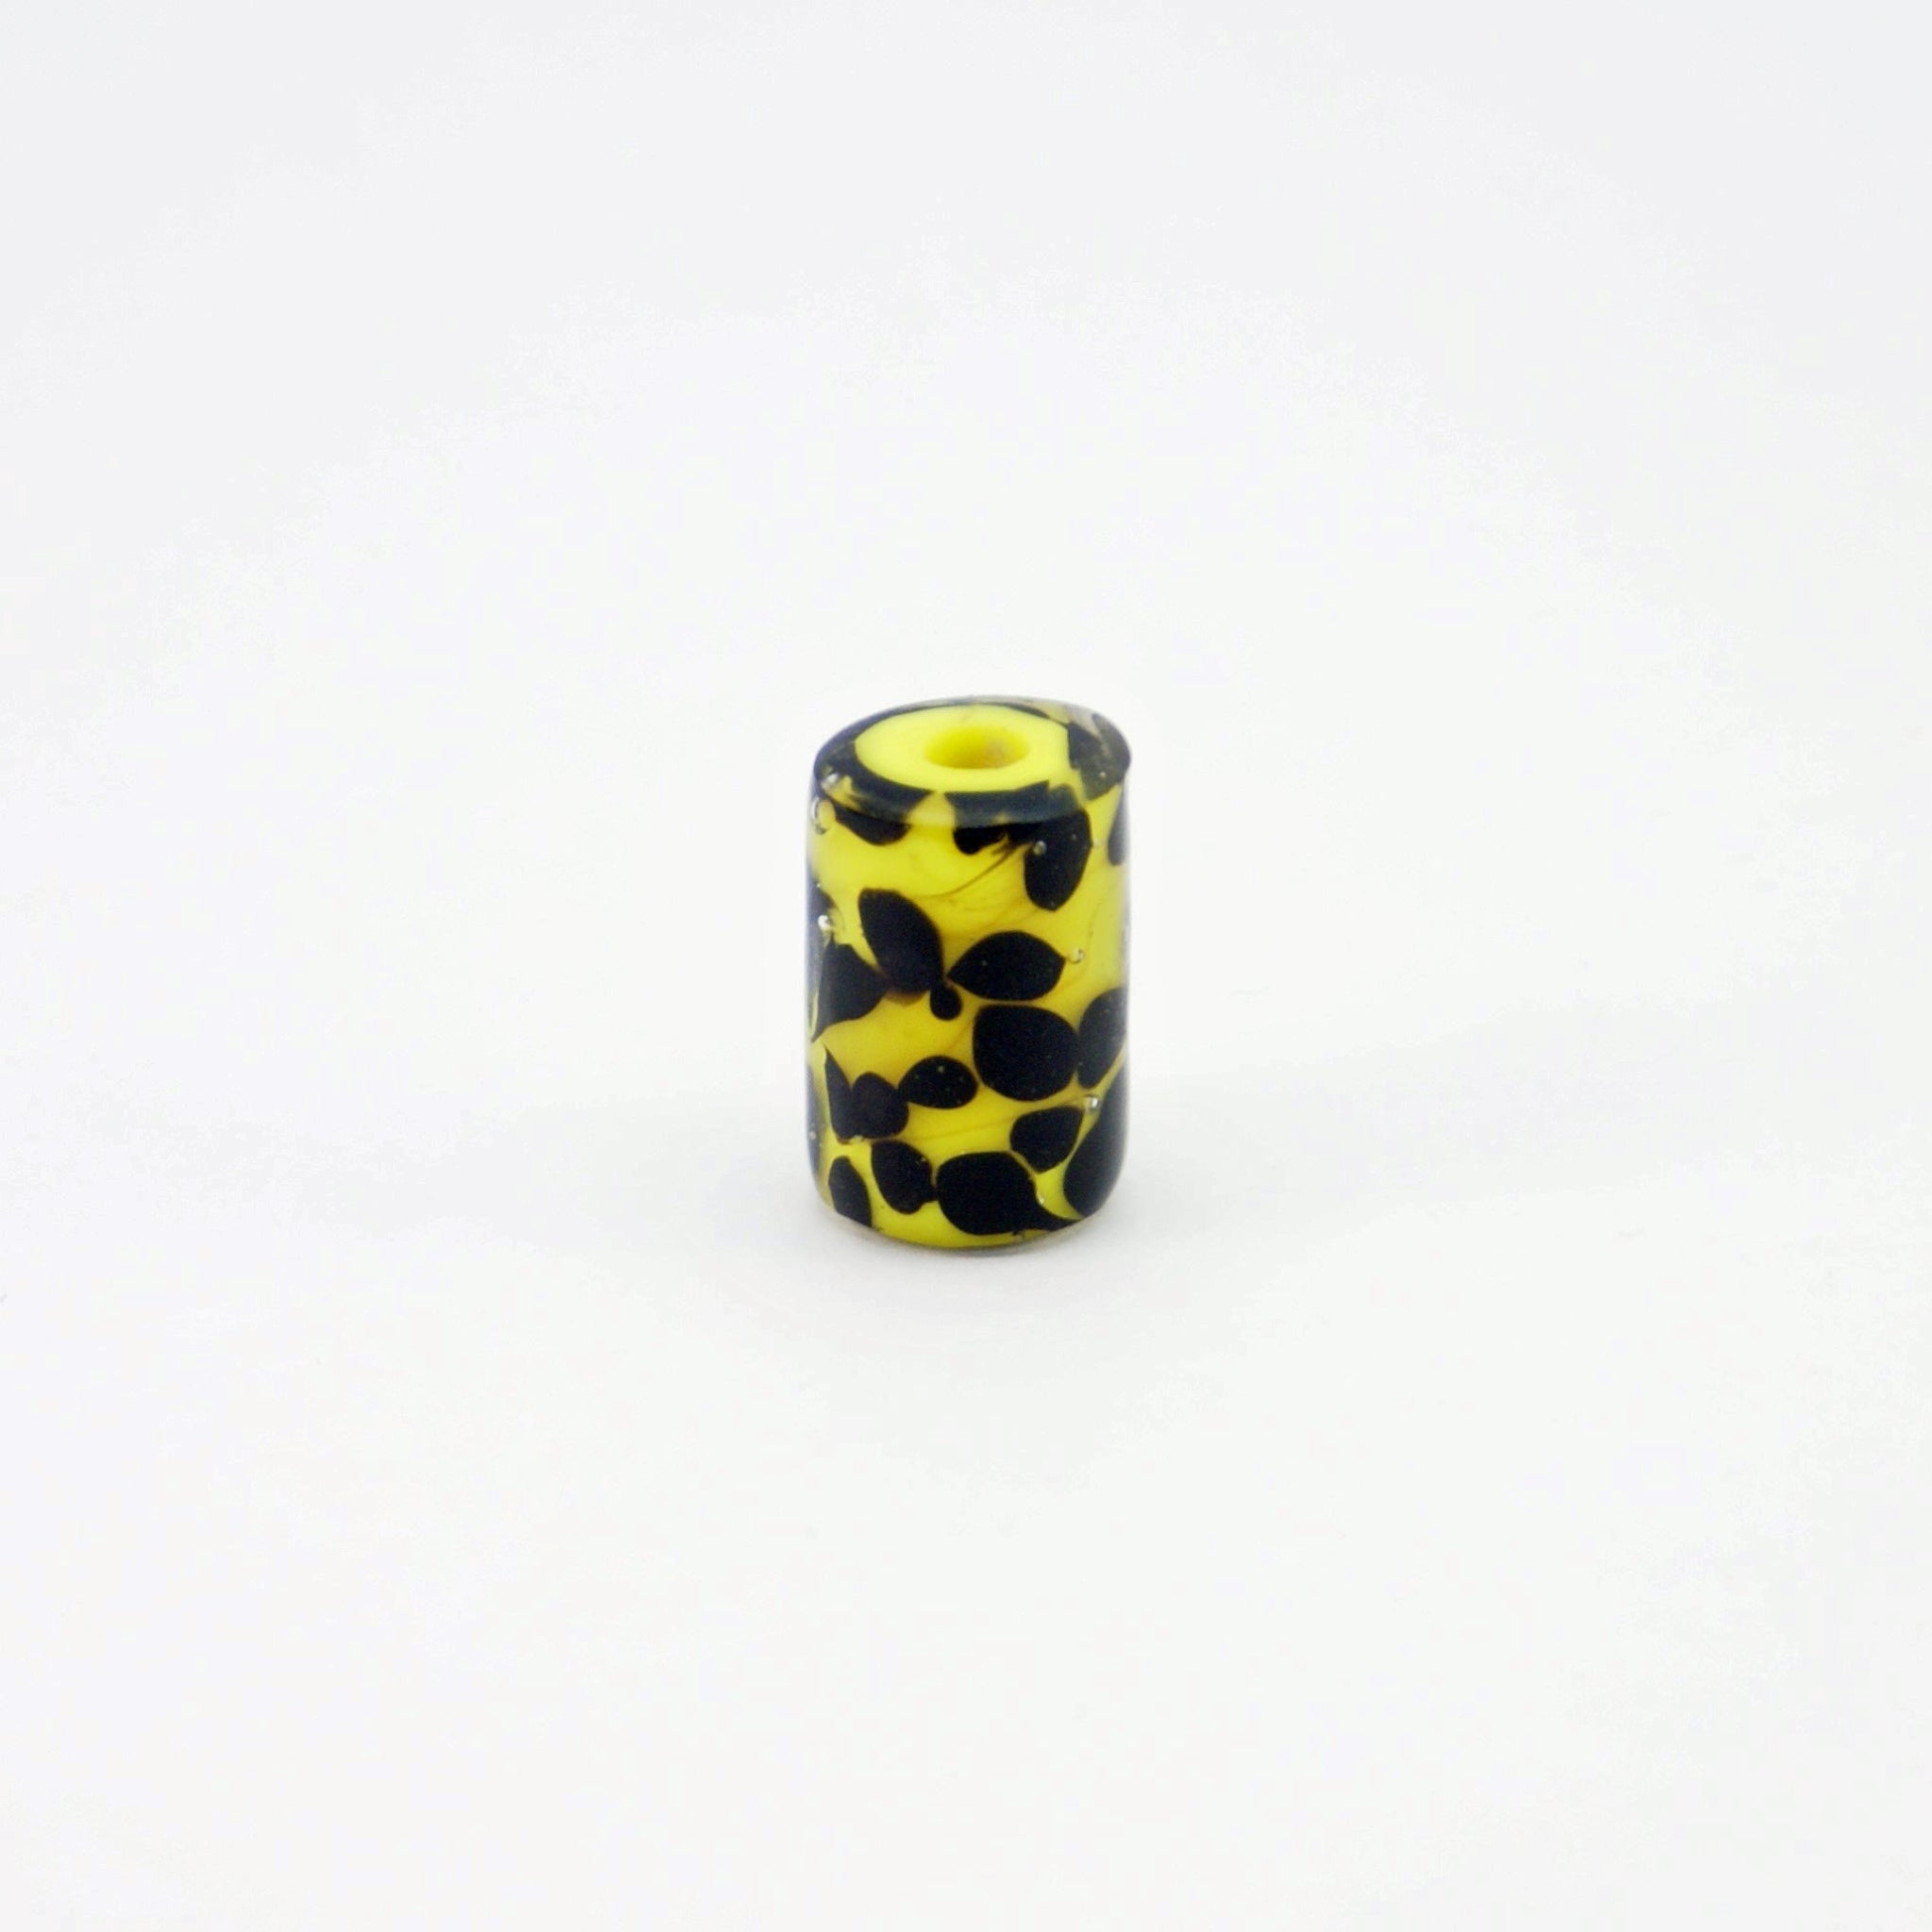 Yellow glass bead with black tadpole-like dots standing on end